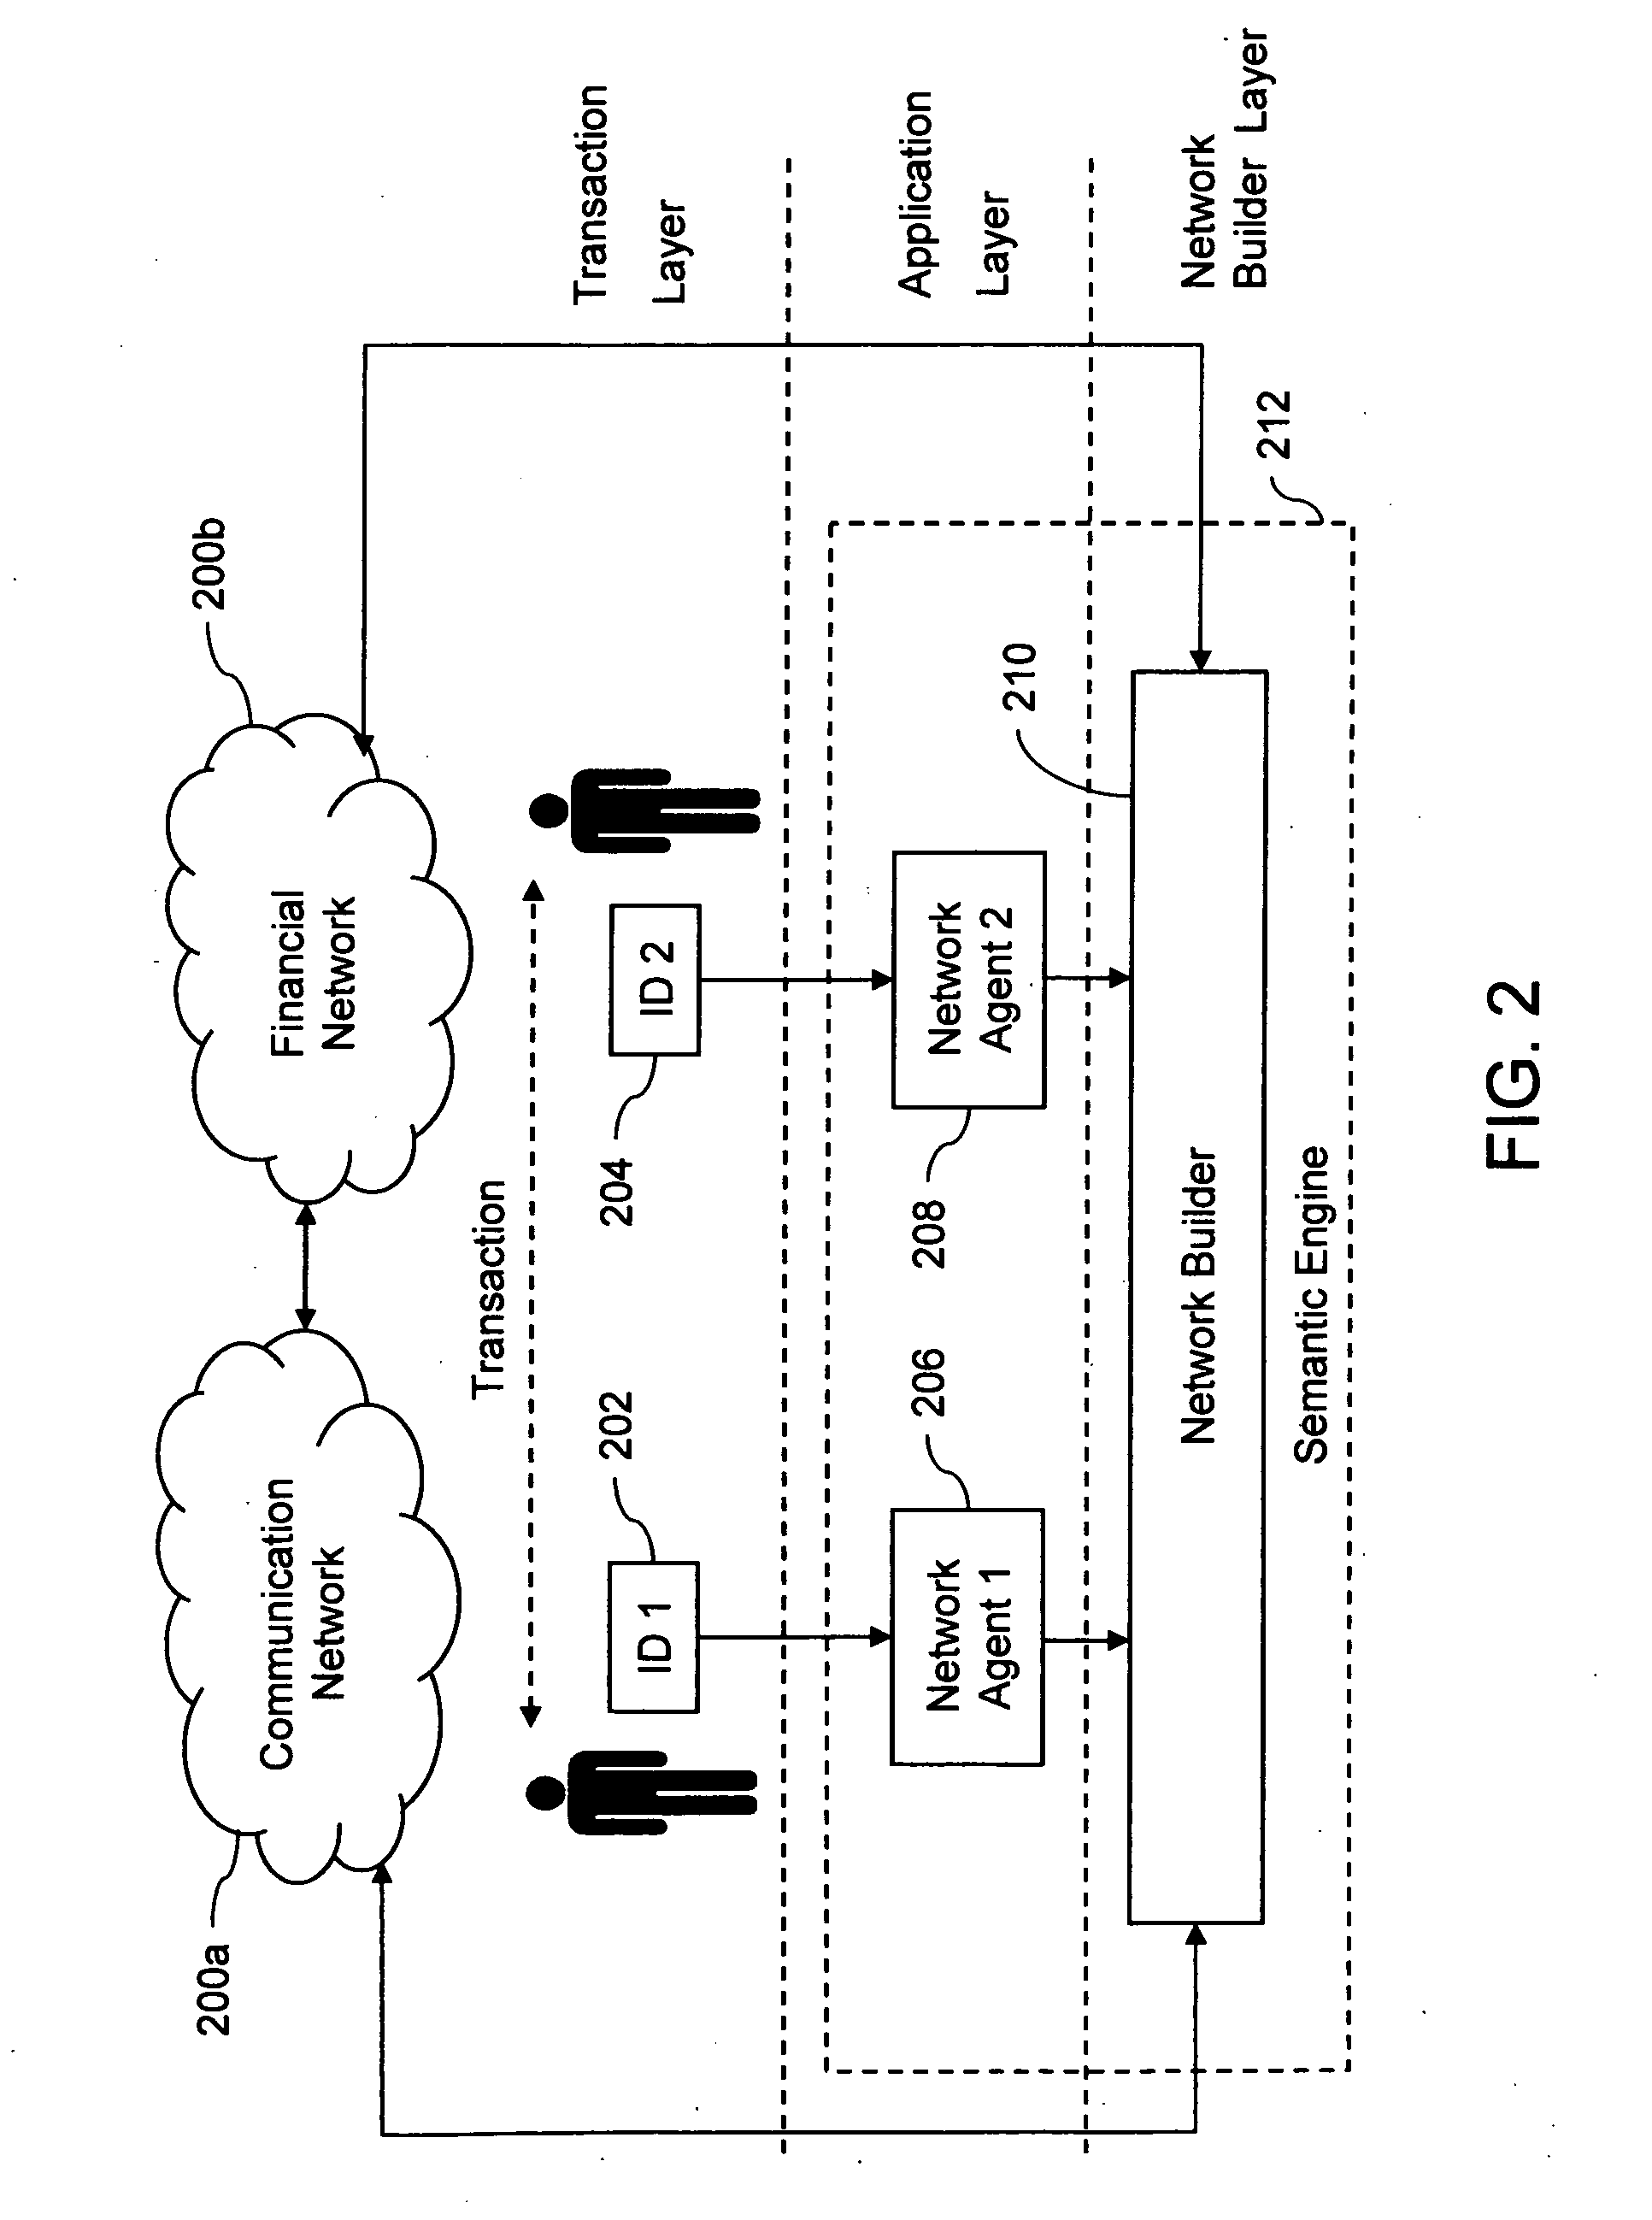 Method and system of ranking transaction channels associated with real world identities, based on their attributes and preferences